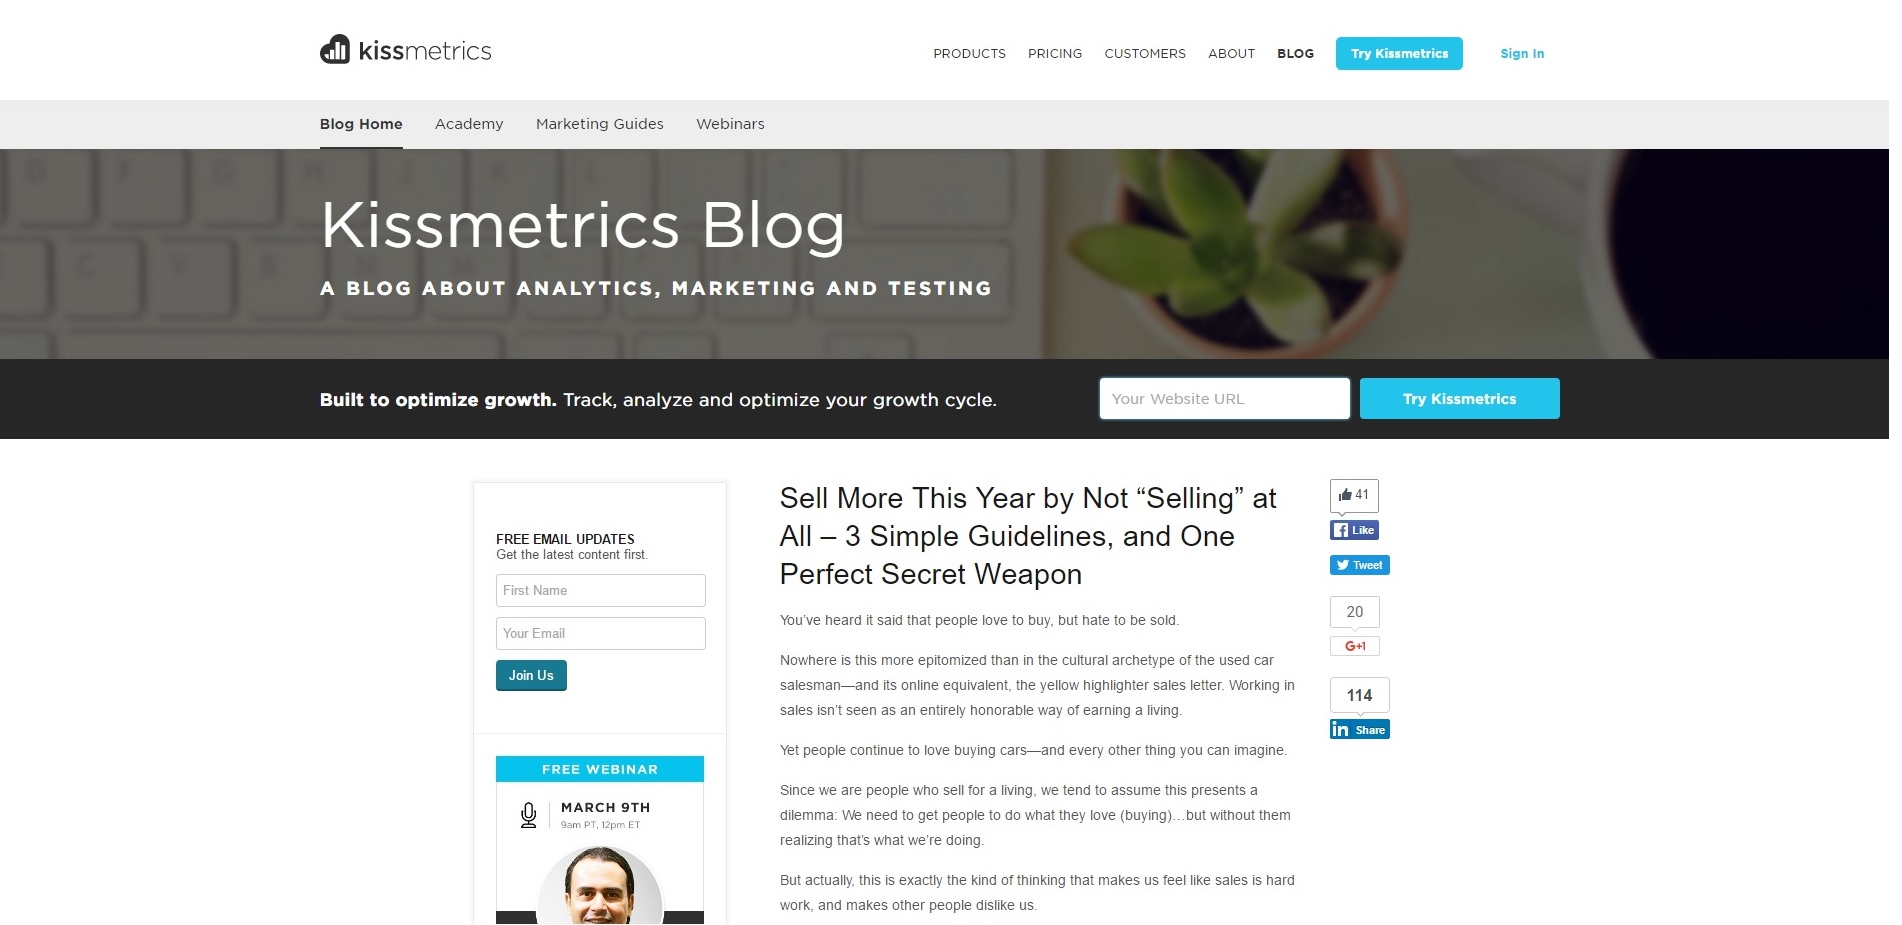 Kissmetrics Blog: Sell More This Year by Not “Selling” at All